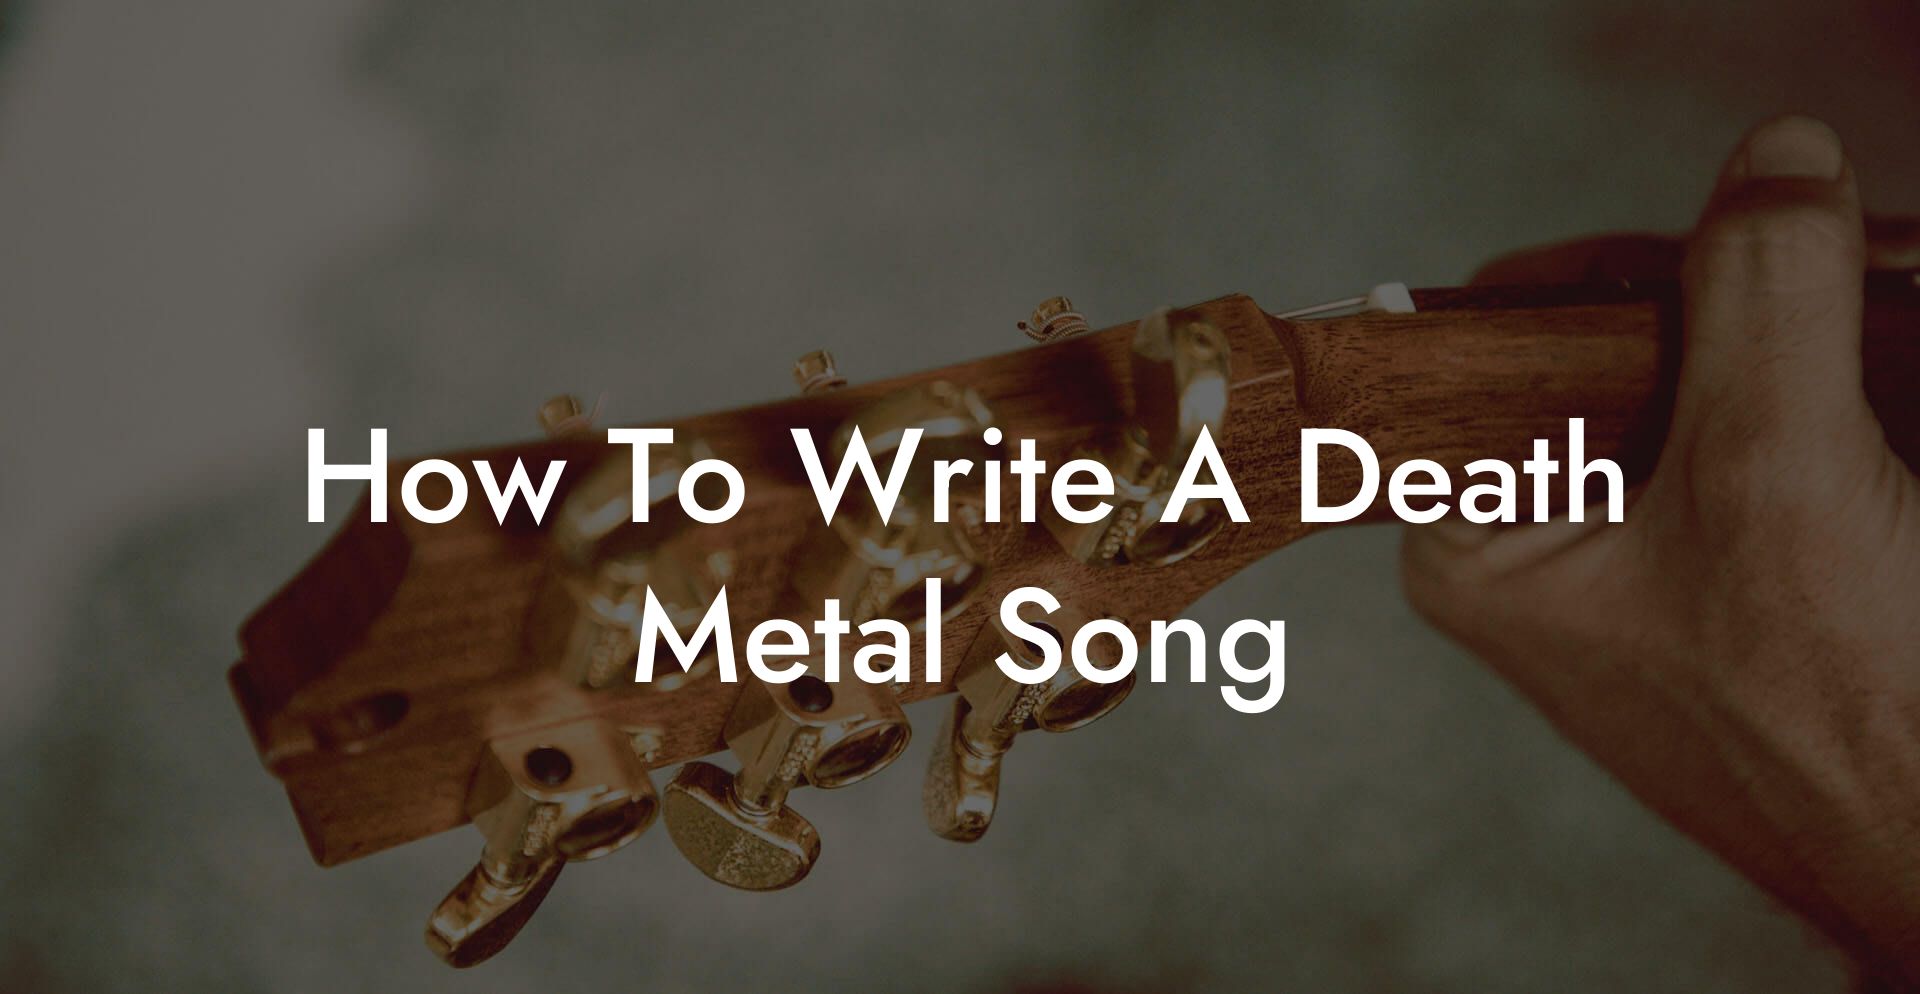 how to write a death metal song lyric assistant